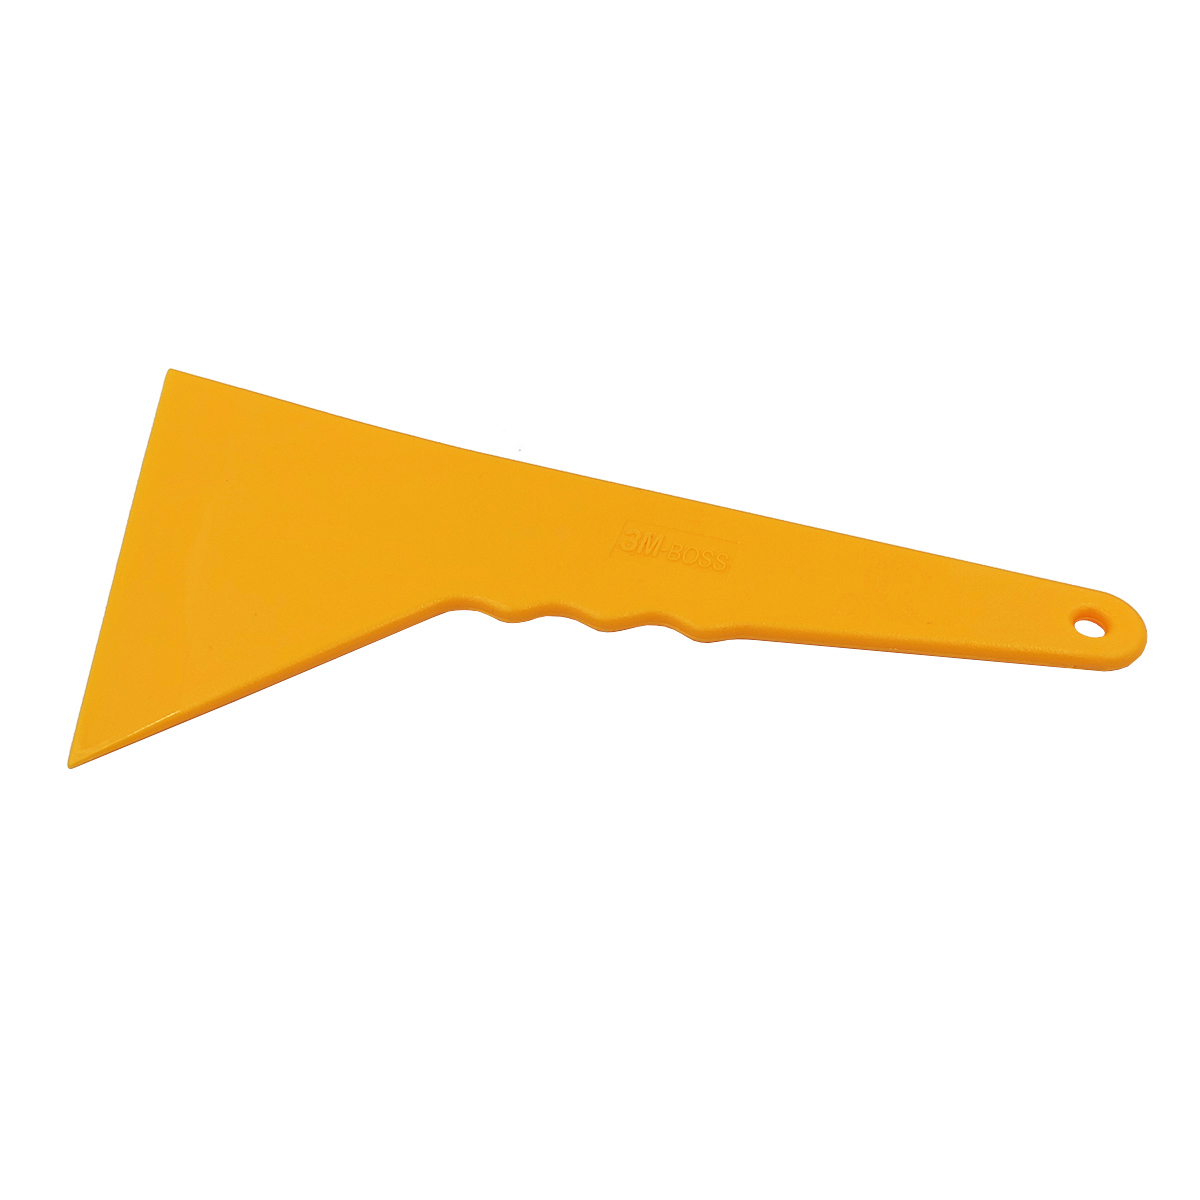 5pcs Triangle Scraper Yellow Plastic 24*12cm with Long Handle Vinyl Film Glue Removing Industry Floor Cleaning Squeegee 5A01